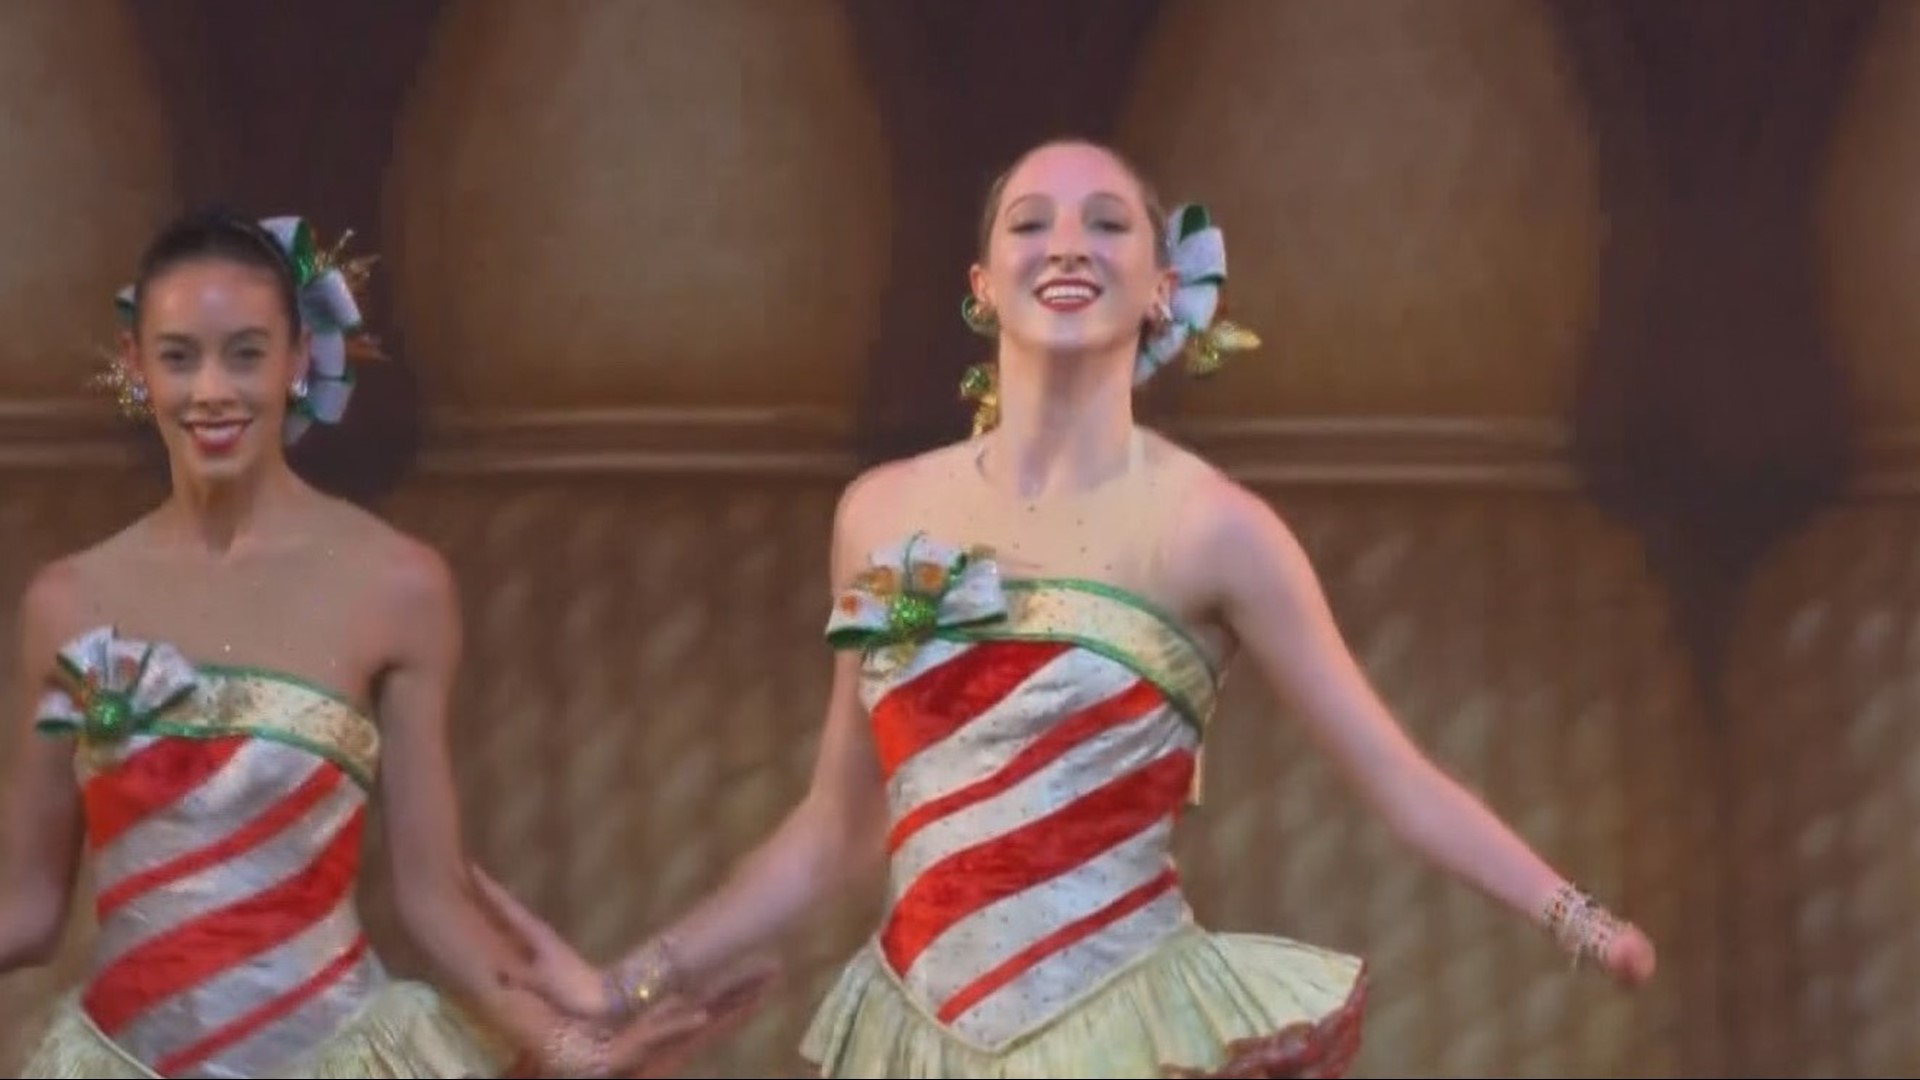 Porltand's Sydney Mesher brings something new to the stage as part of the renowned Radio City Rockettes.